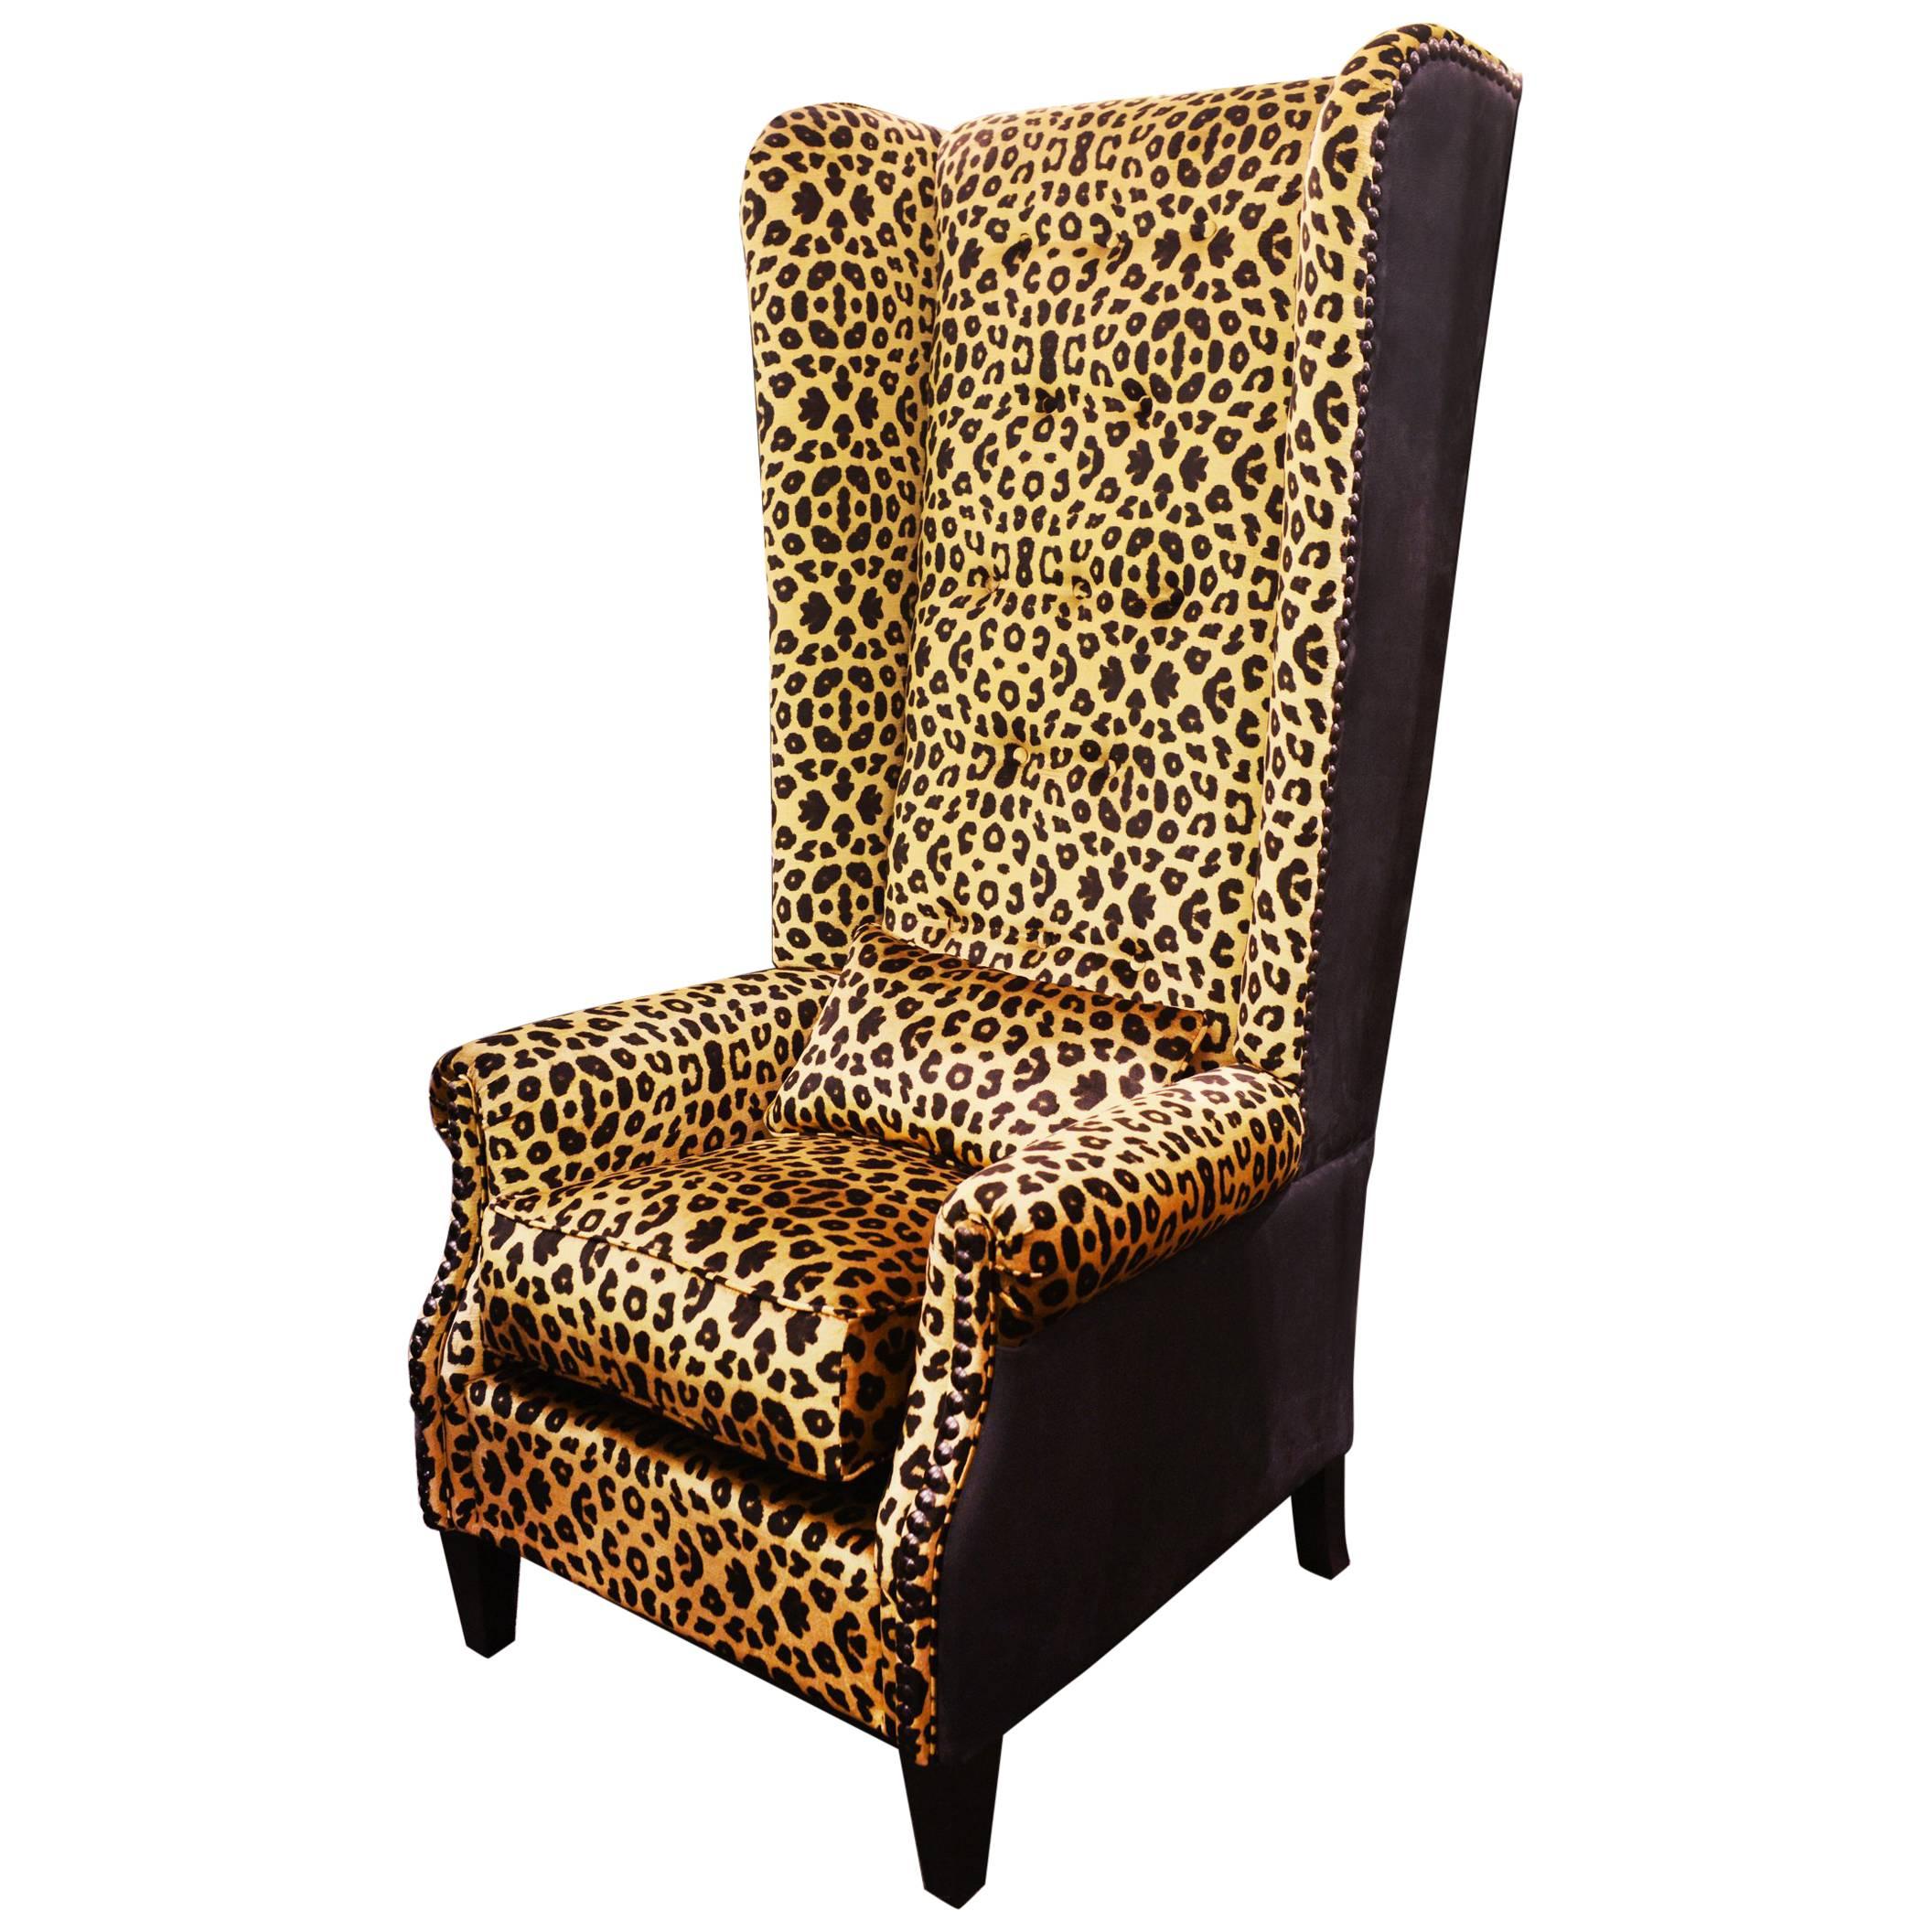 Leopard Armchair with Black Nubuck Leather and Velvet Fabric